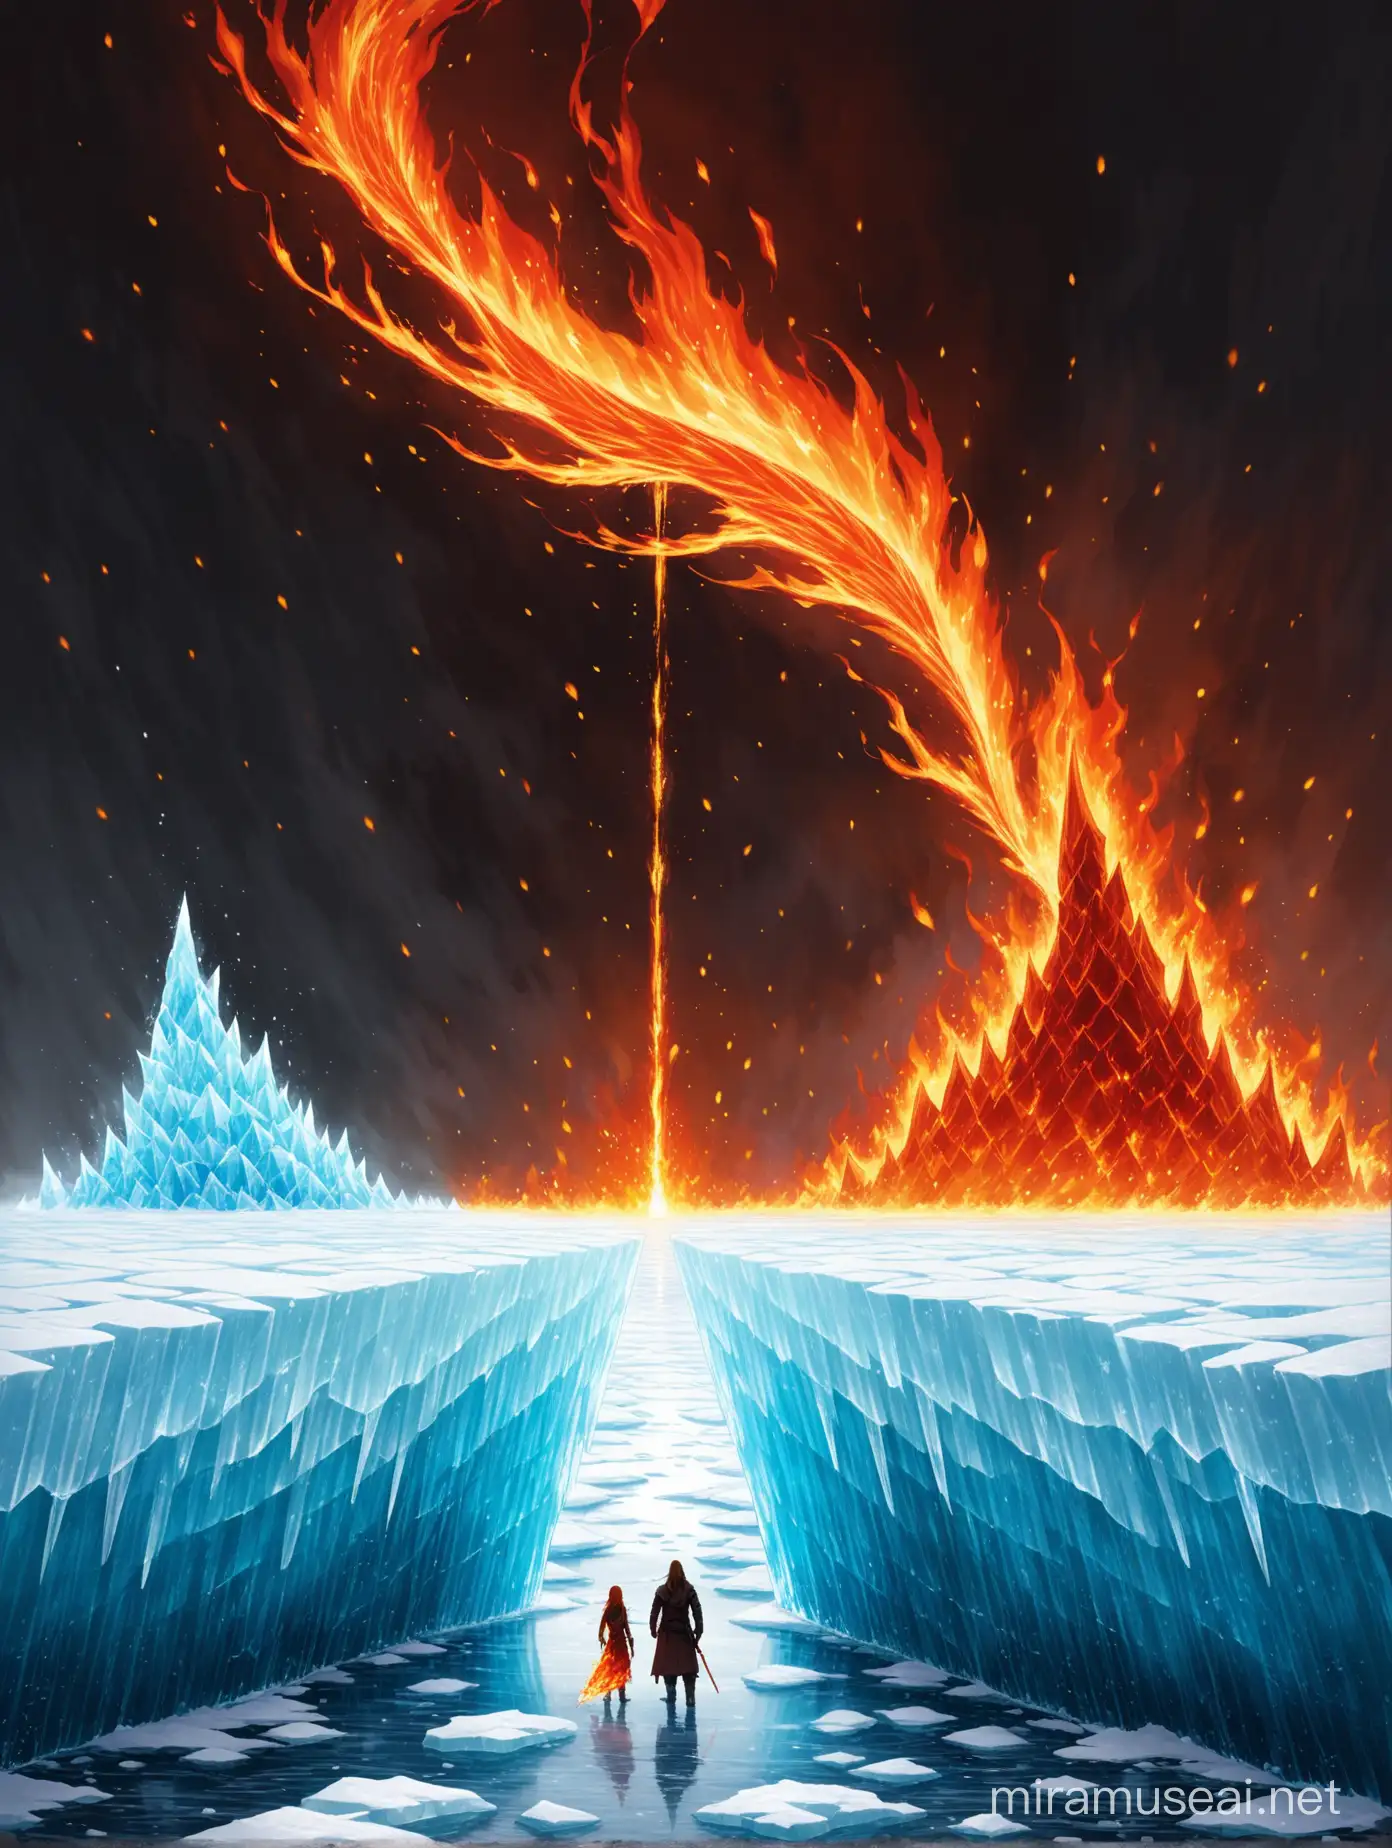 the contrast between ice and fire